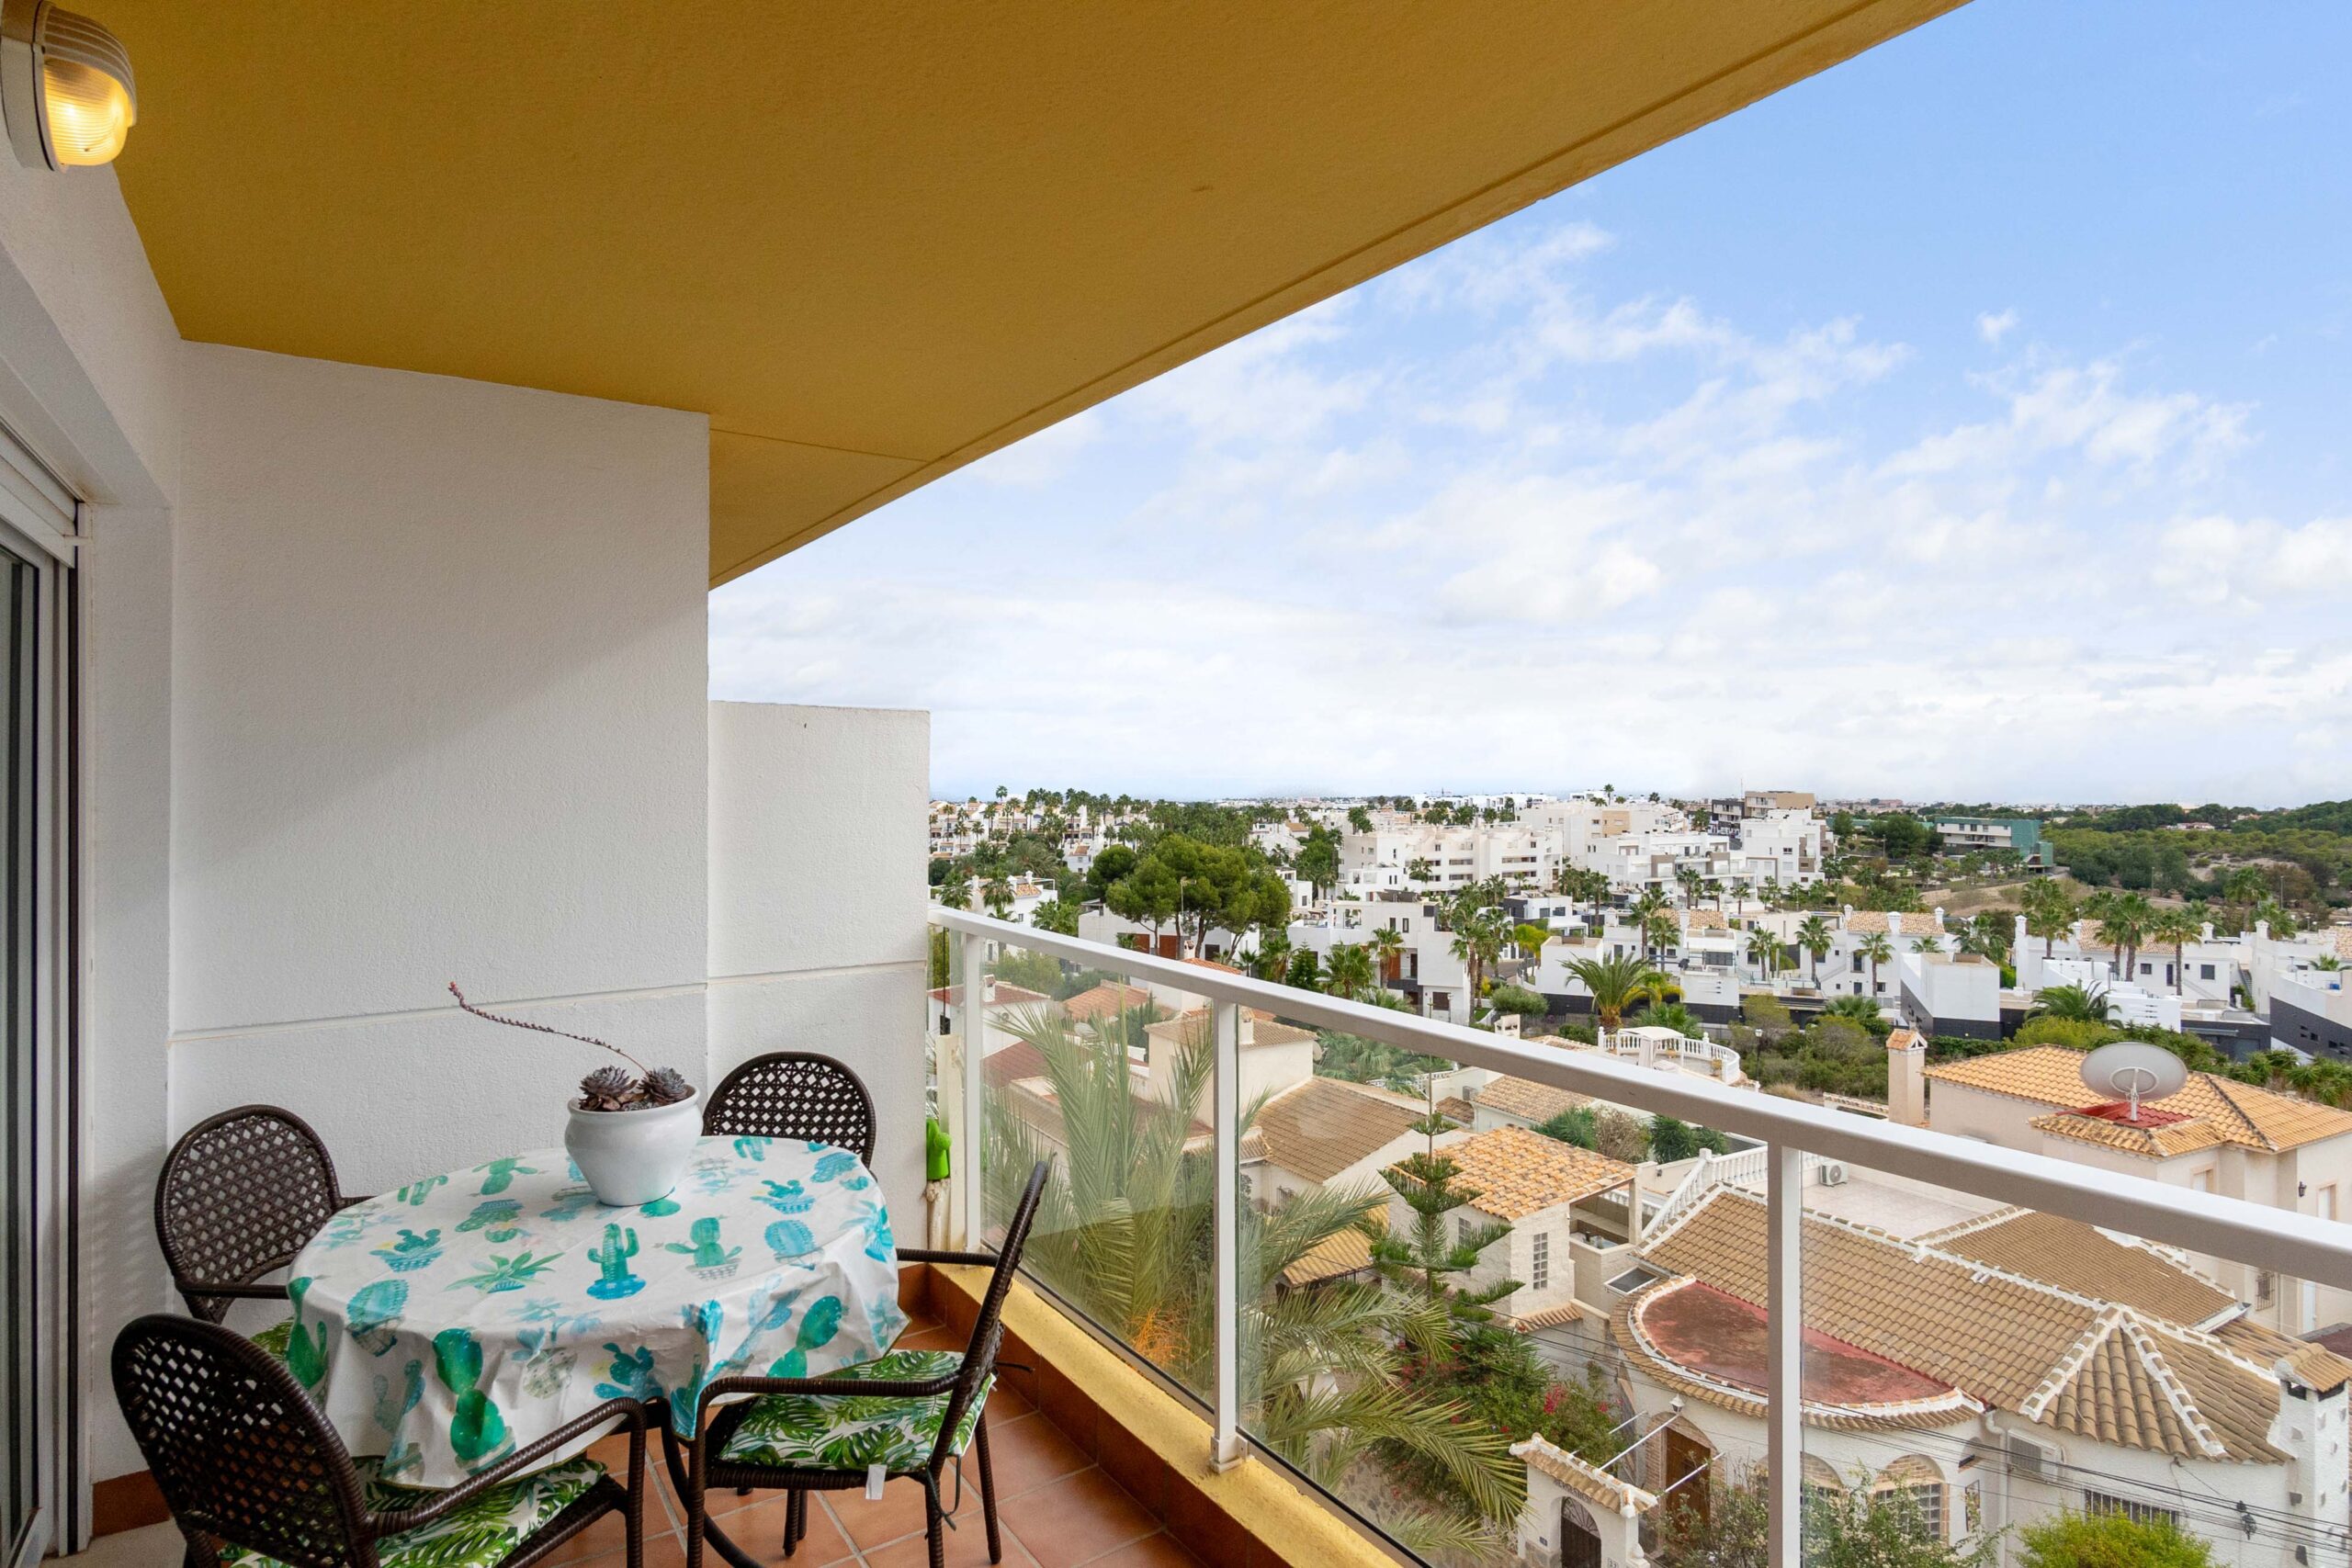 South-east facing penthouse for sale with spacious roof terrace and fantastic views in Villamartin.